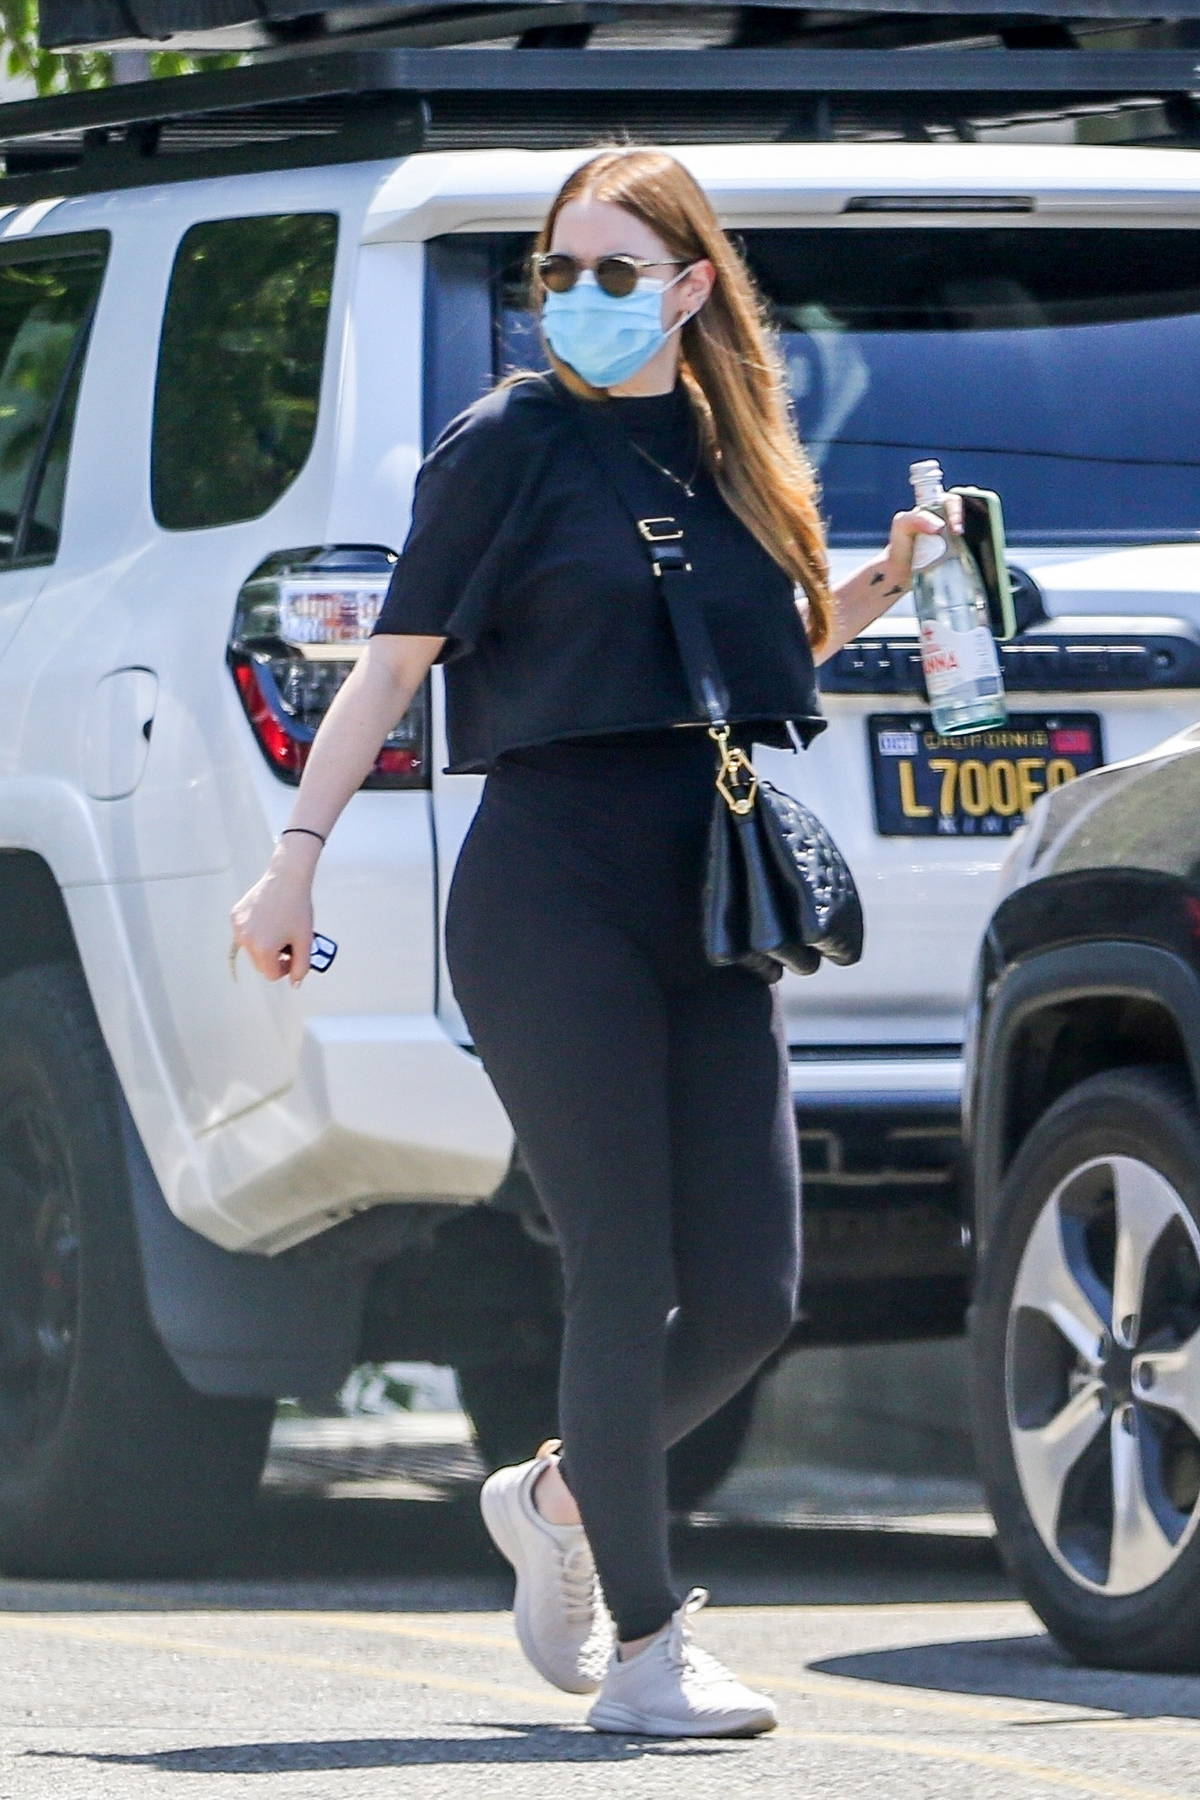 https://www.celebsfirst.com/wp-content/uploads/2021/06/emma-stone-dons-a-cropped-black-t-shirt-and-leggings-while-heading-into-a-gym-in-los-angeles-150621_4.jpg